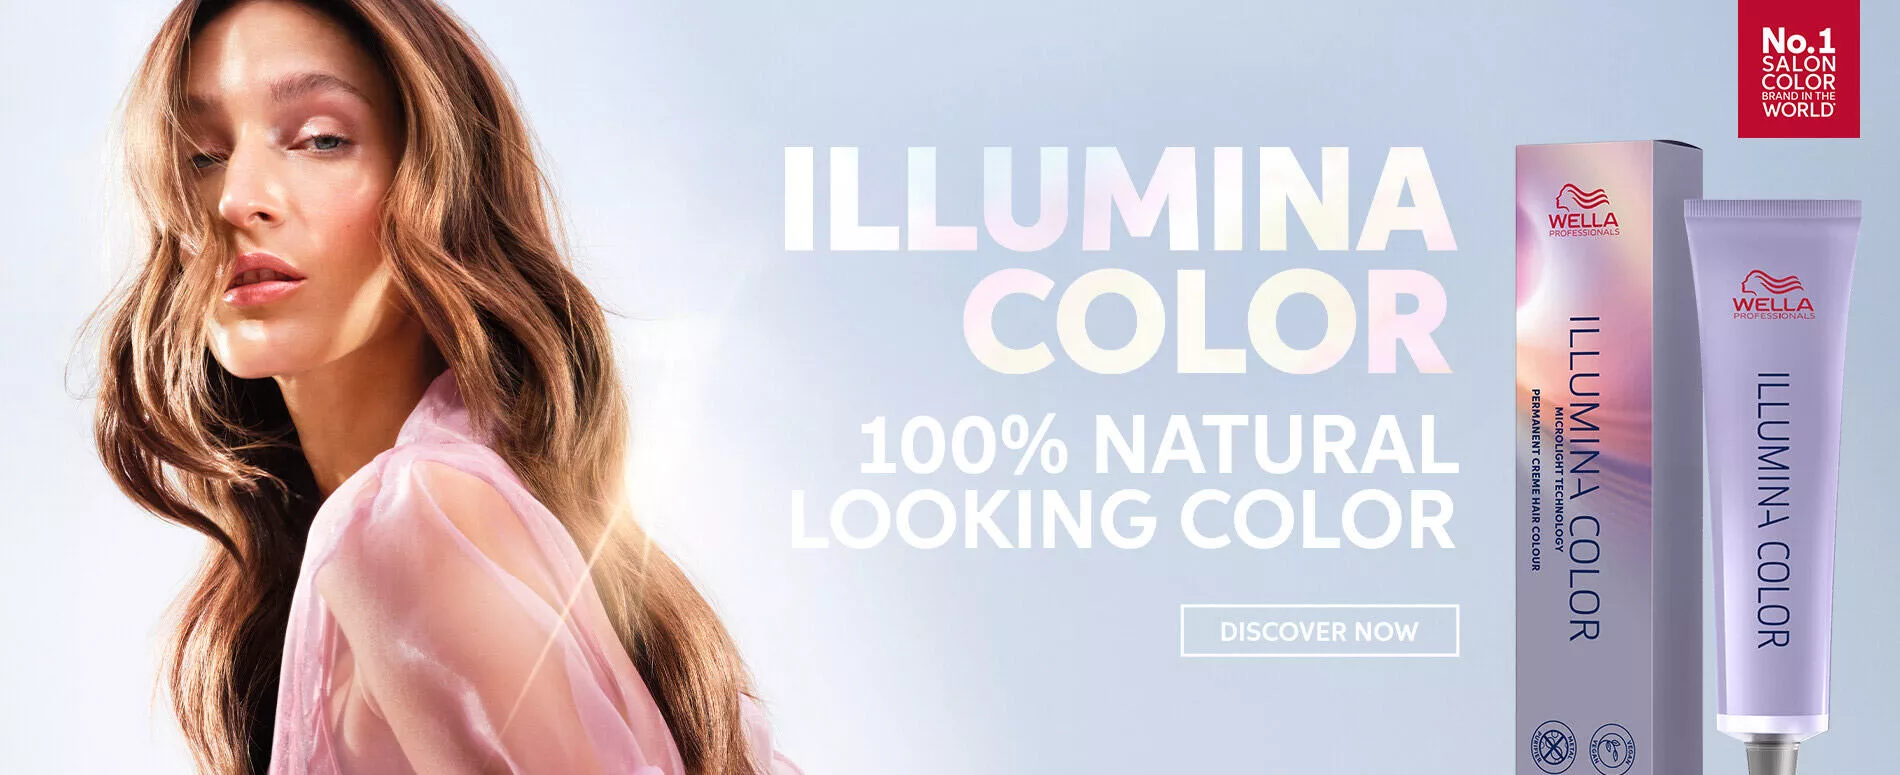 Illumina color banner with new packaging and new brunette model with 100% natural looking color